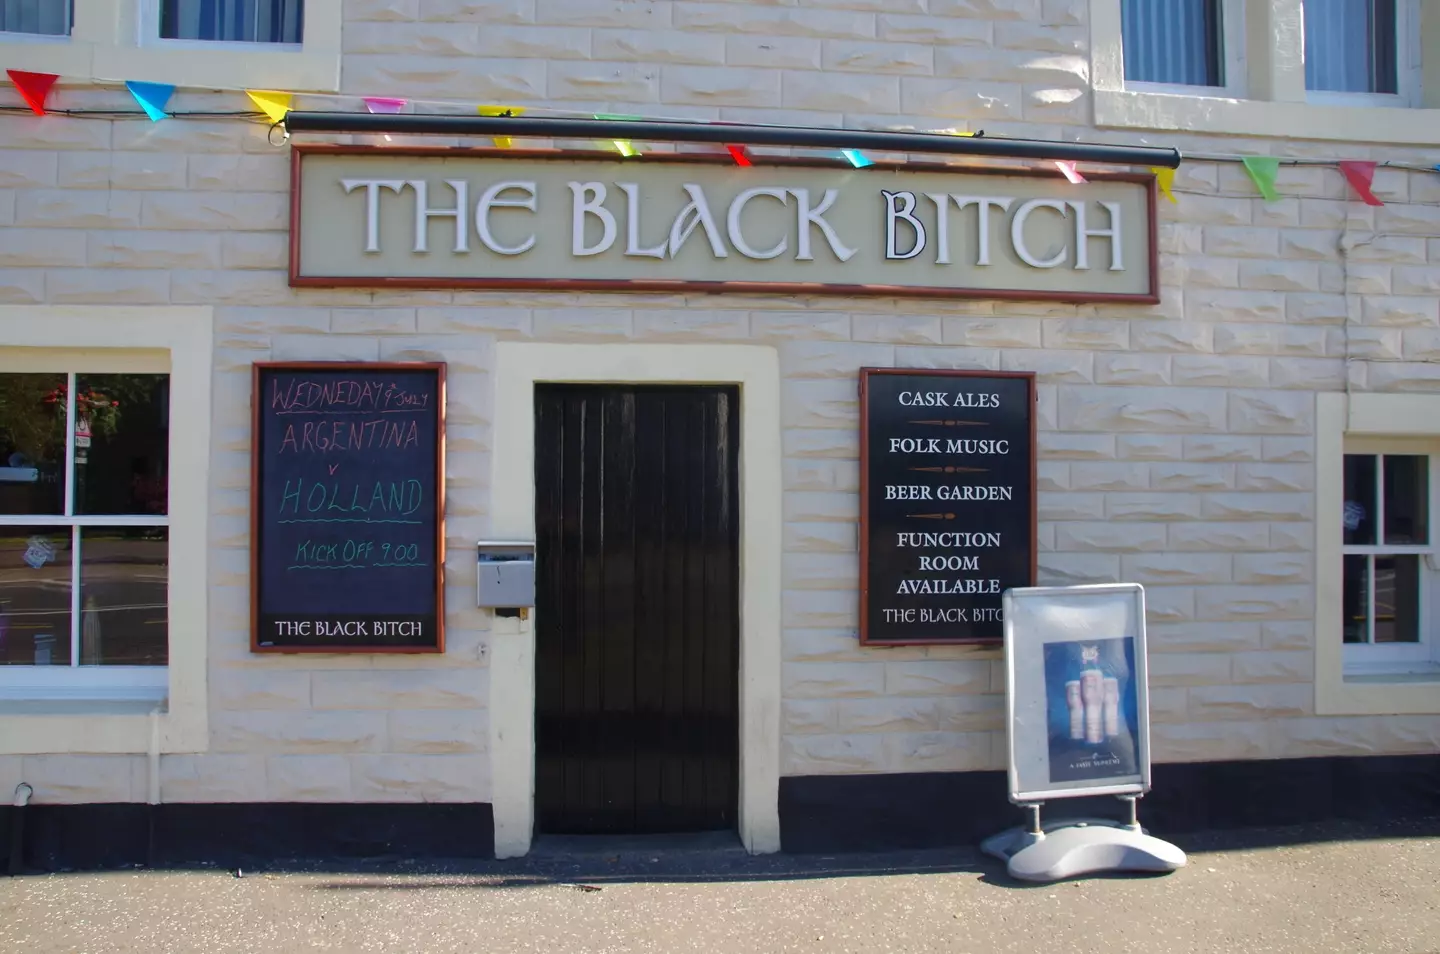 The historic pub is being renamed.